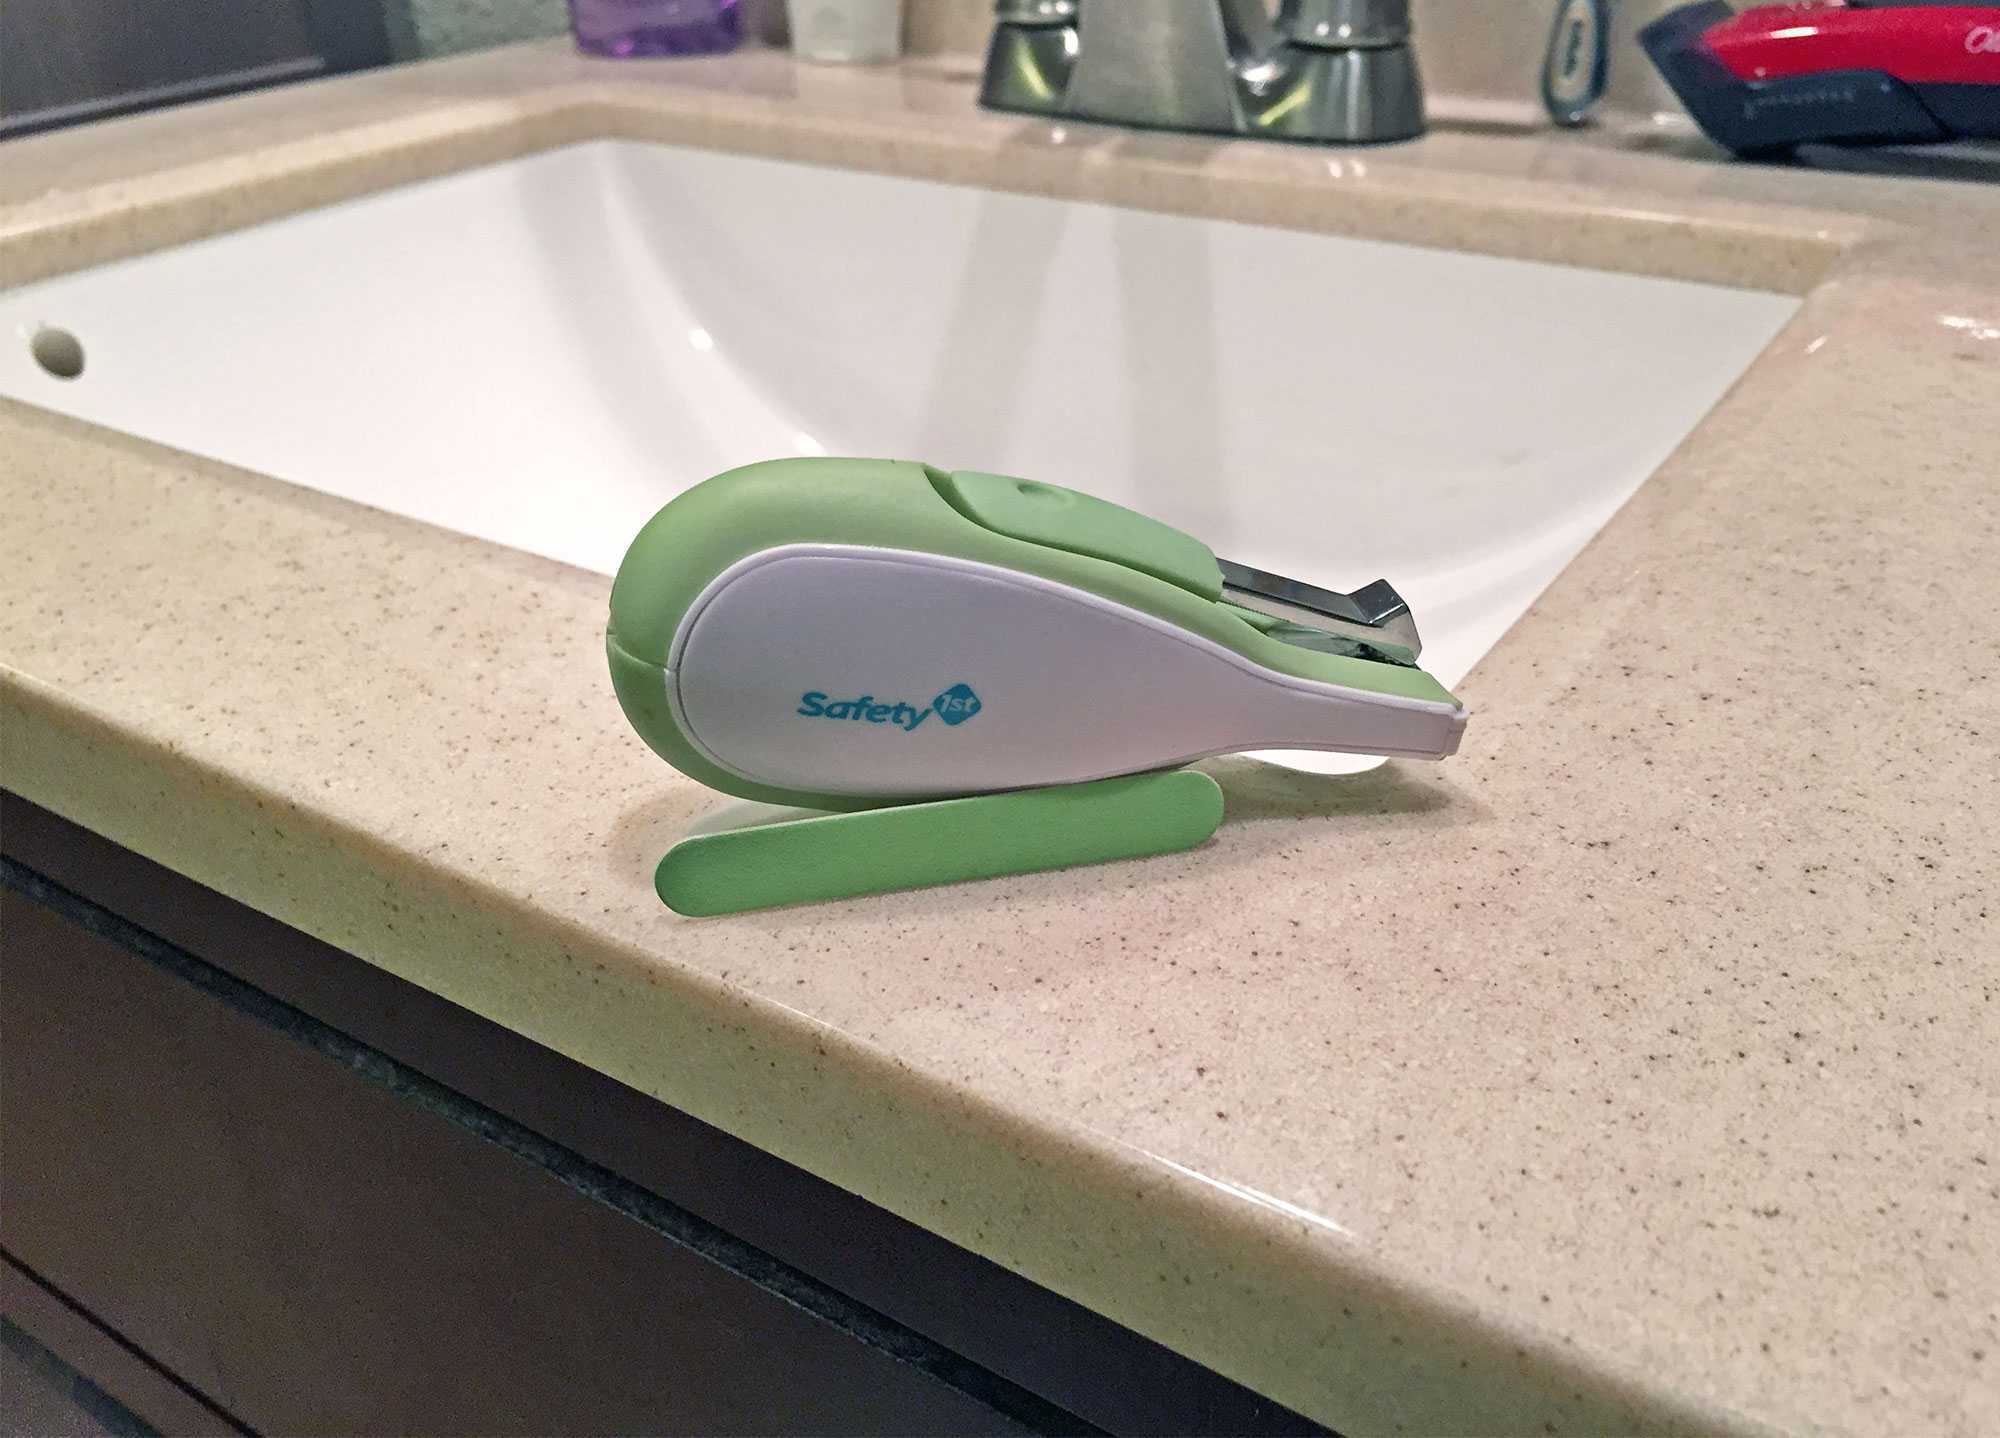 Best Baby Nail Clippers